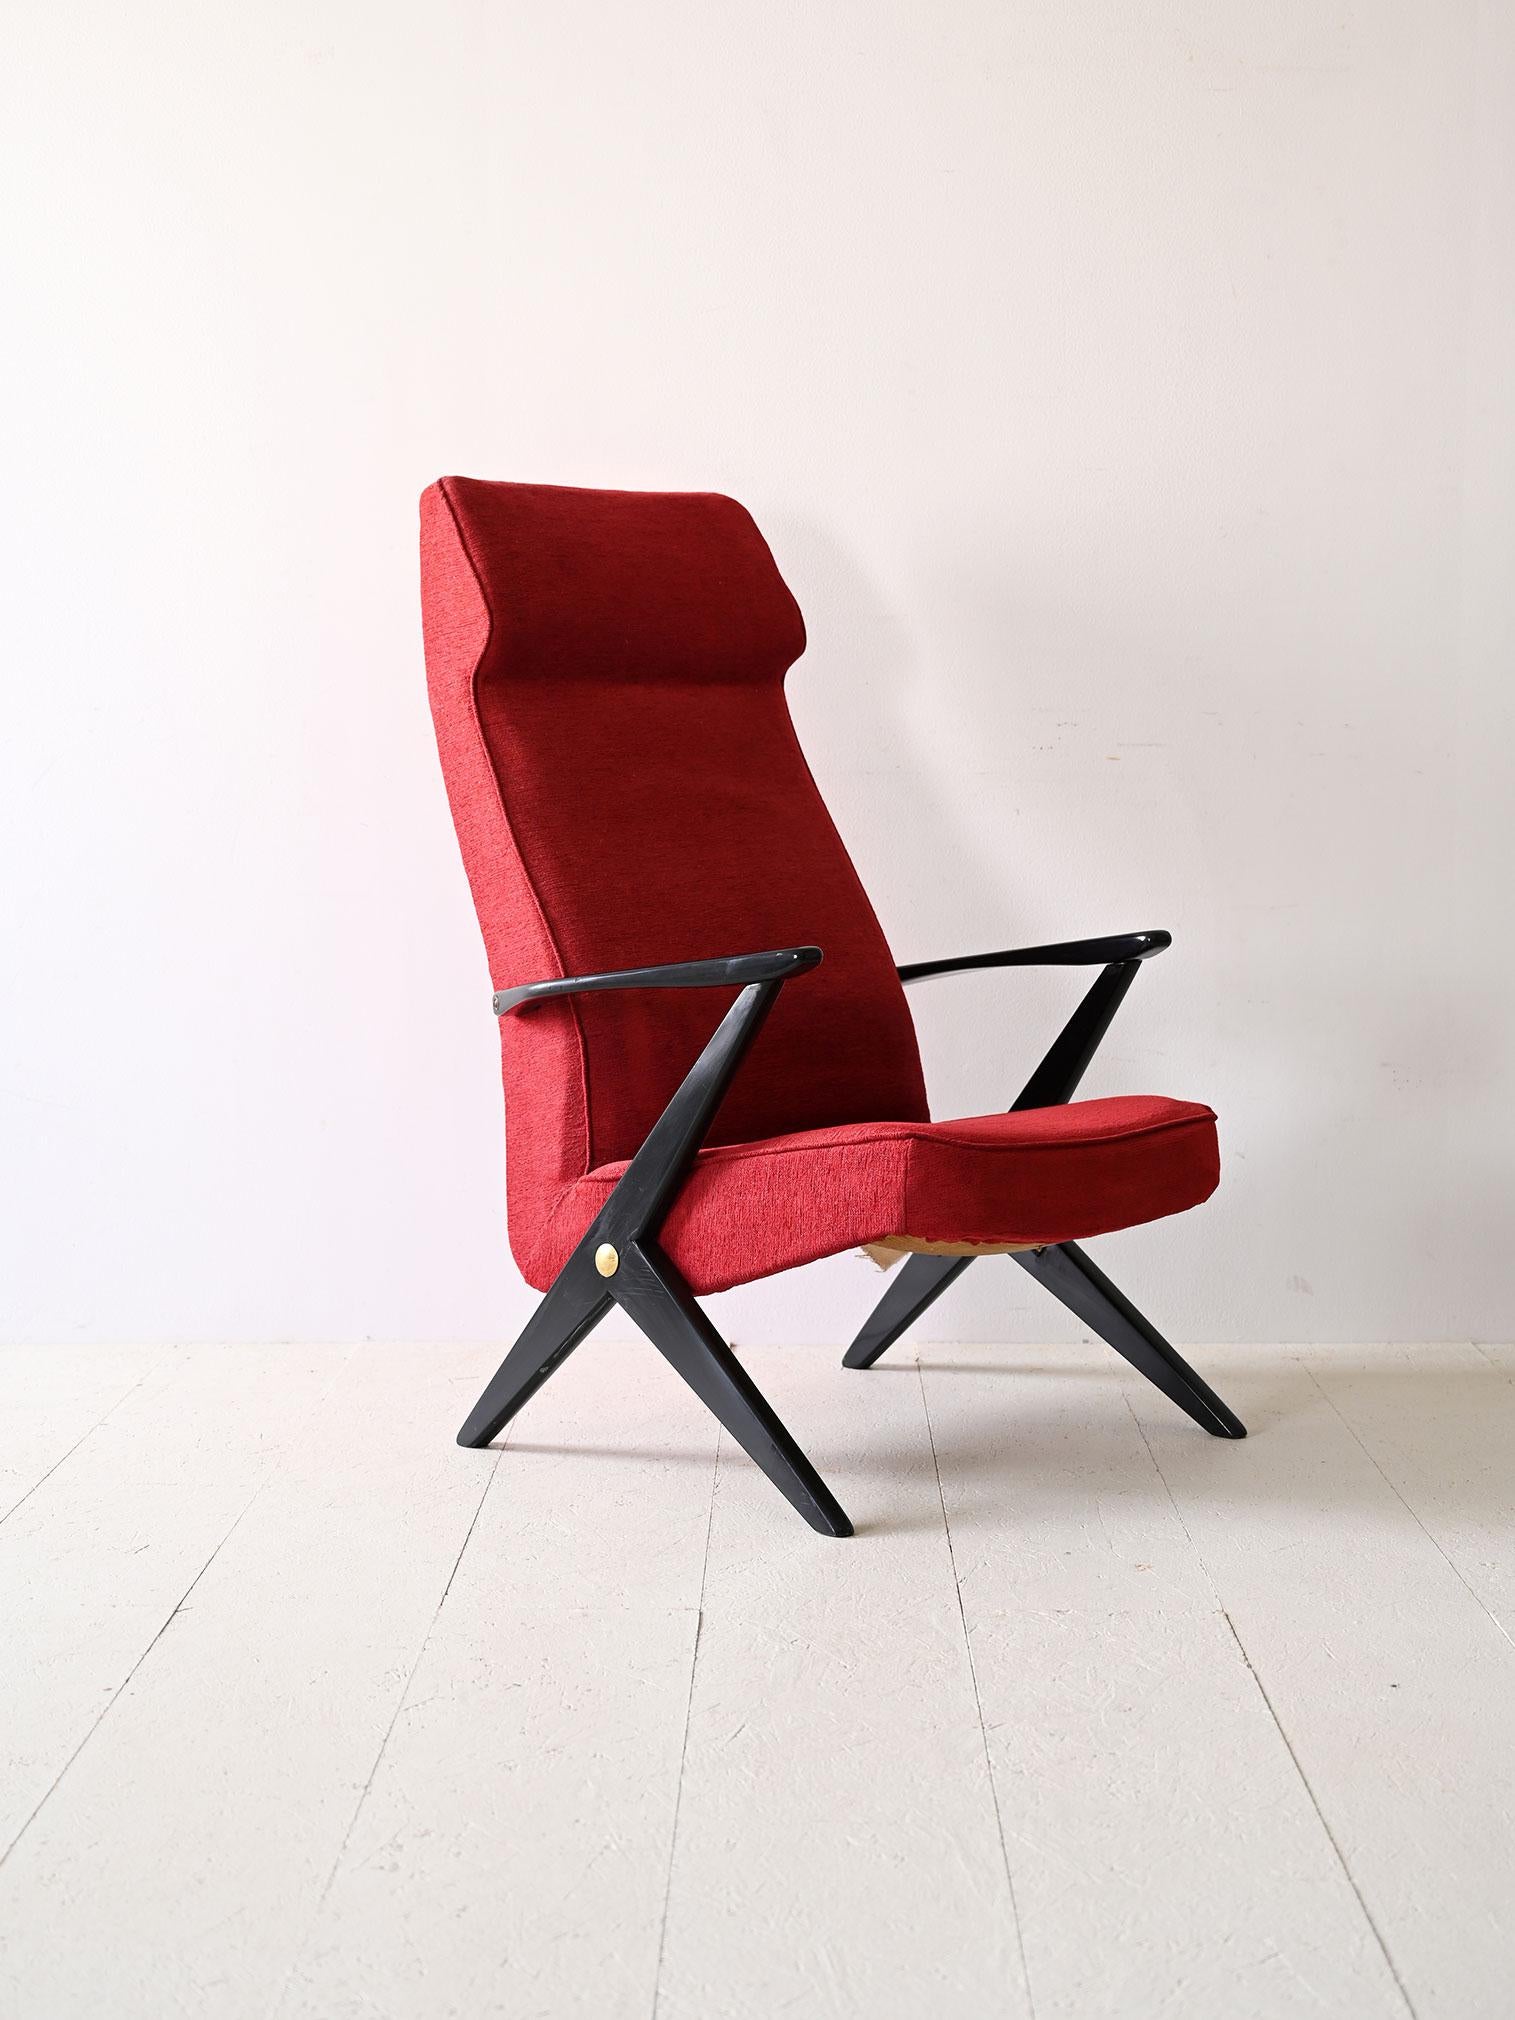 Original 1950s red Nordic armchair.

This characterful armchair is wrapped in a vibrant shade of red. The black-colored wooden frame emphasizes the contrast and gives the armchair a sophisticated look.

The designer of this chair is Bengt Ruda who